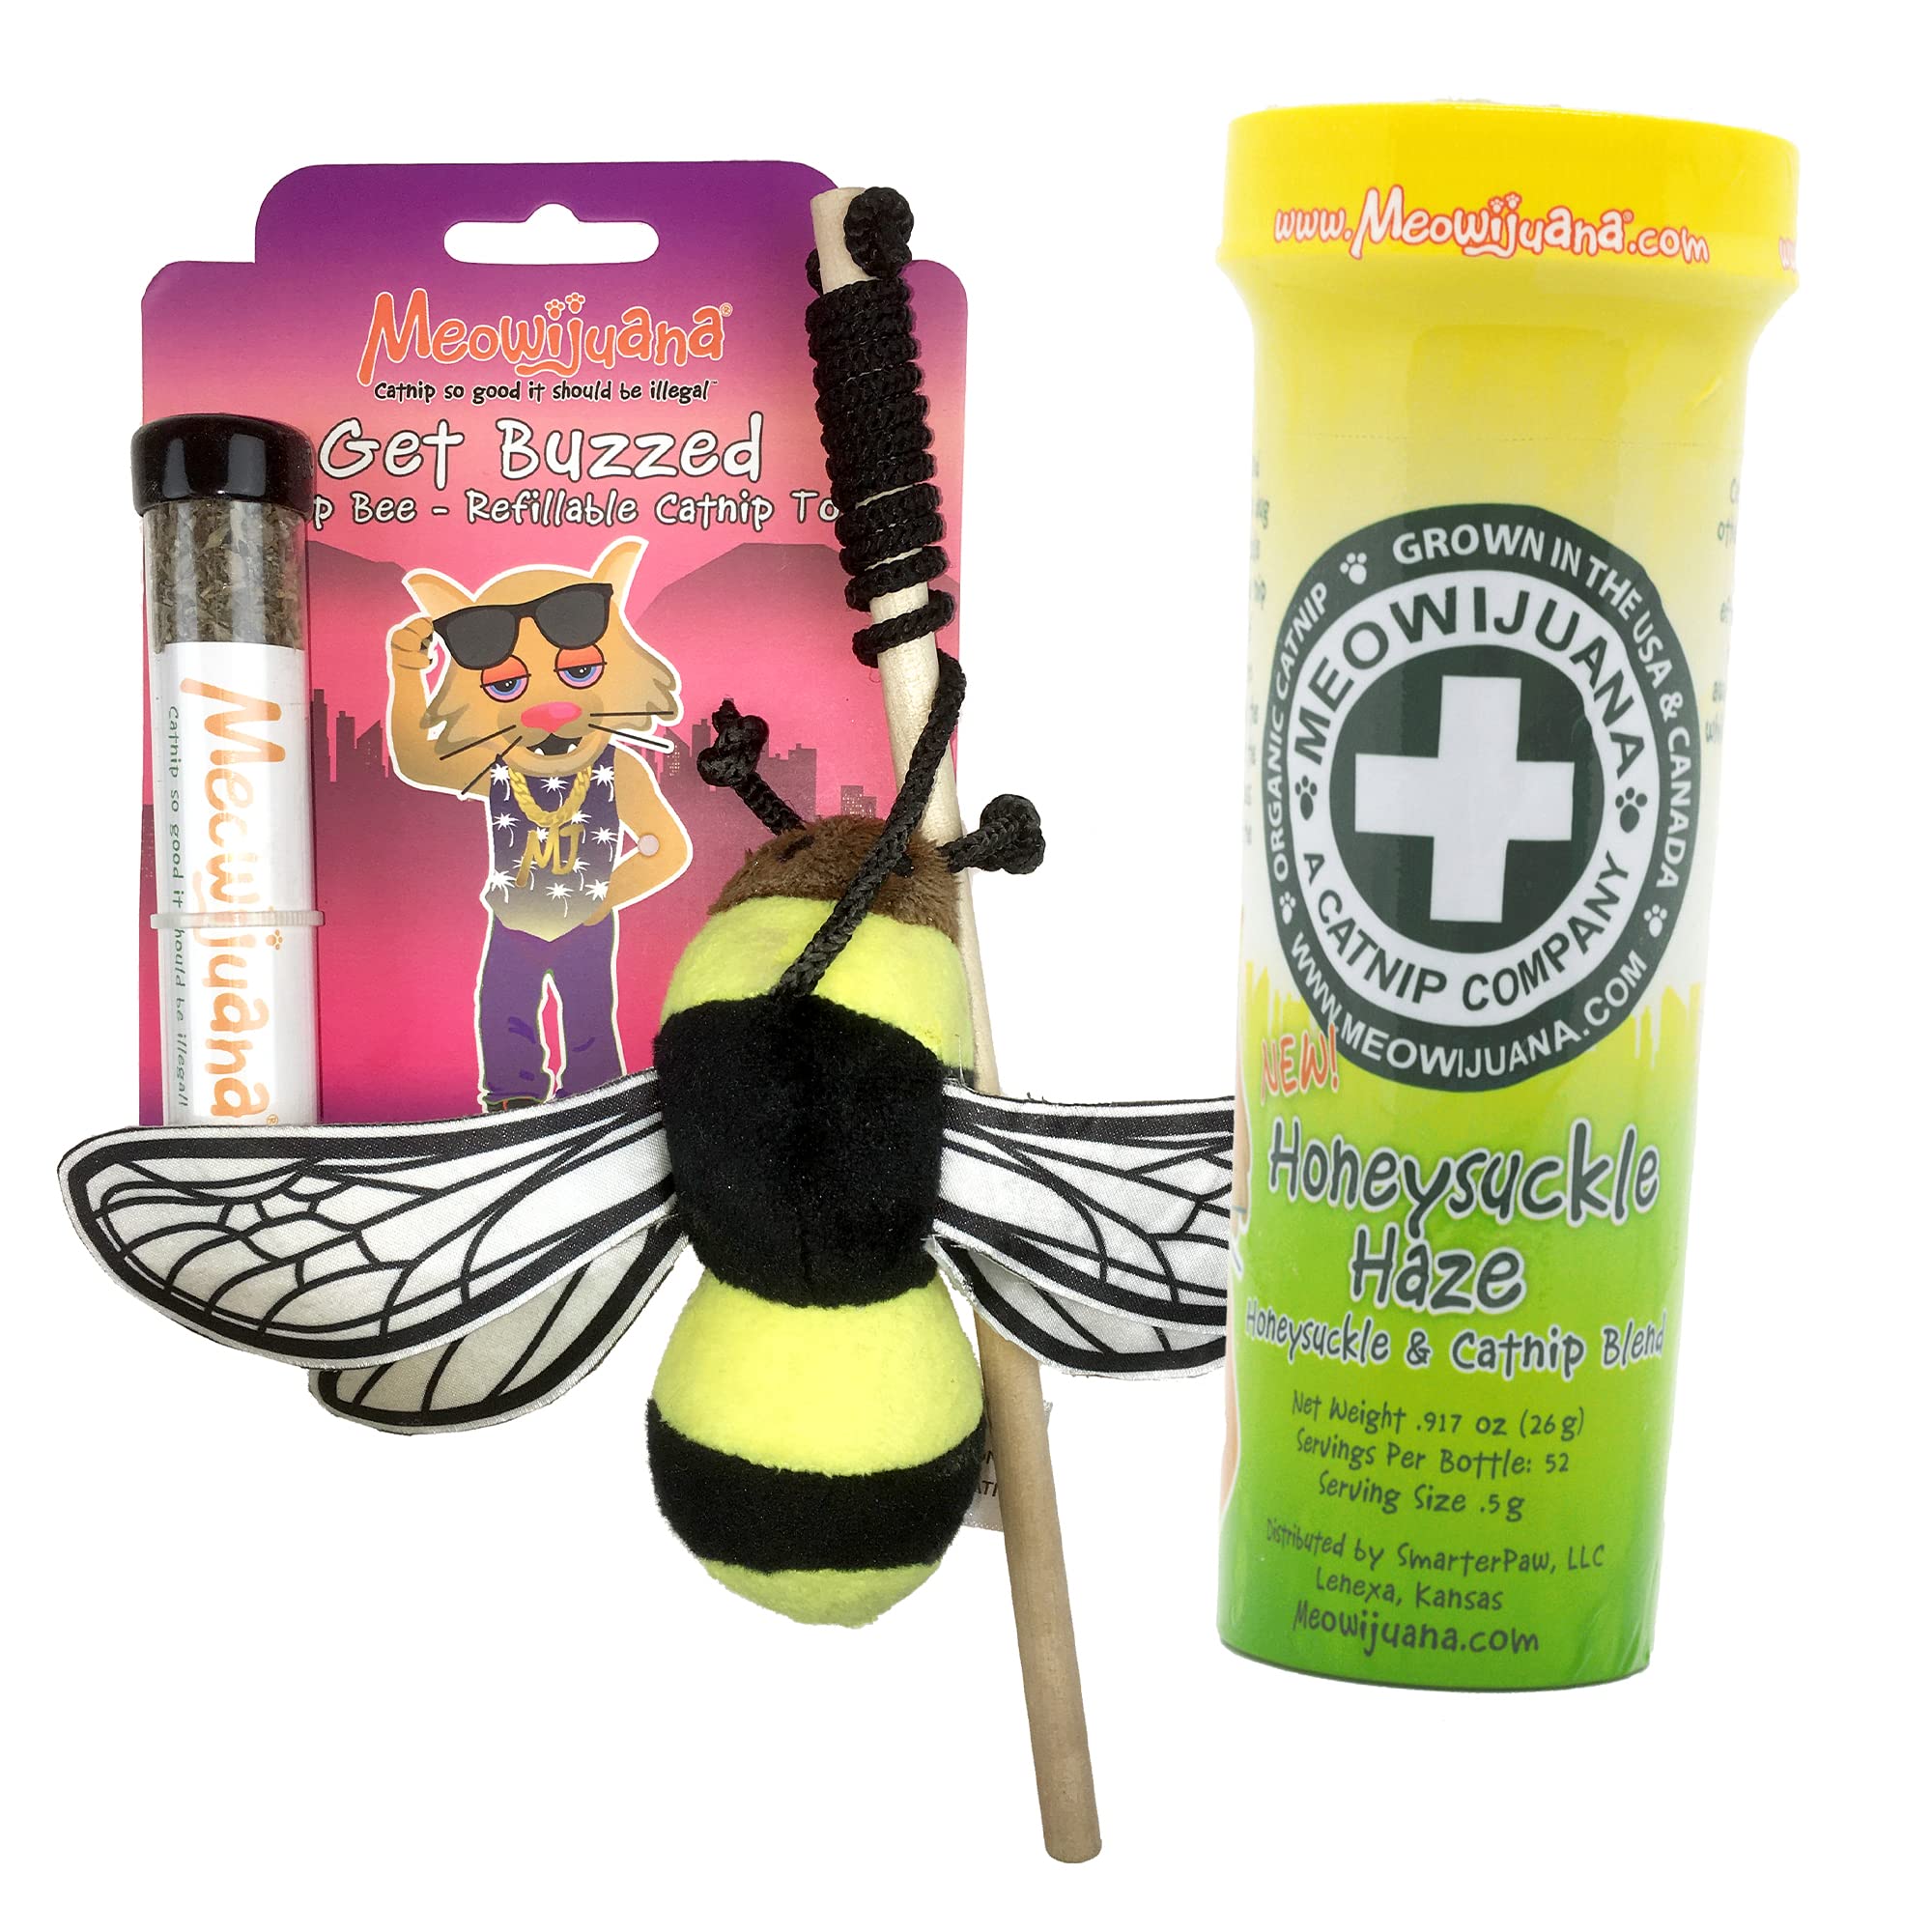 Meowijuana | Honey Bee Bundle | Get Buzzed Refillable Bee Wand Toy and Honeysuckle Haze Catnip Blend | Promotes Play and Cat Health | Includes Organic Catnip